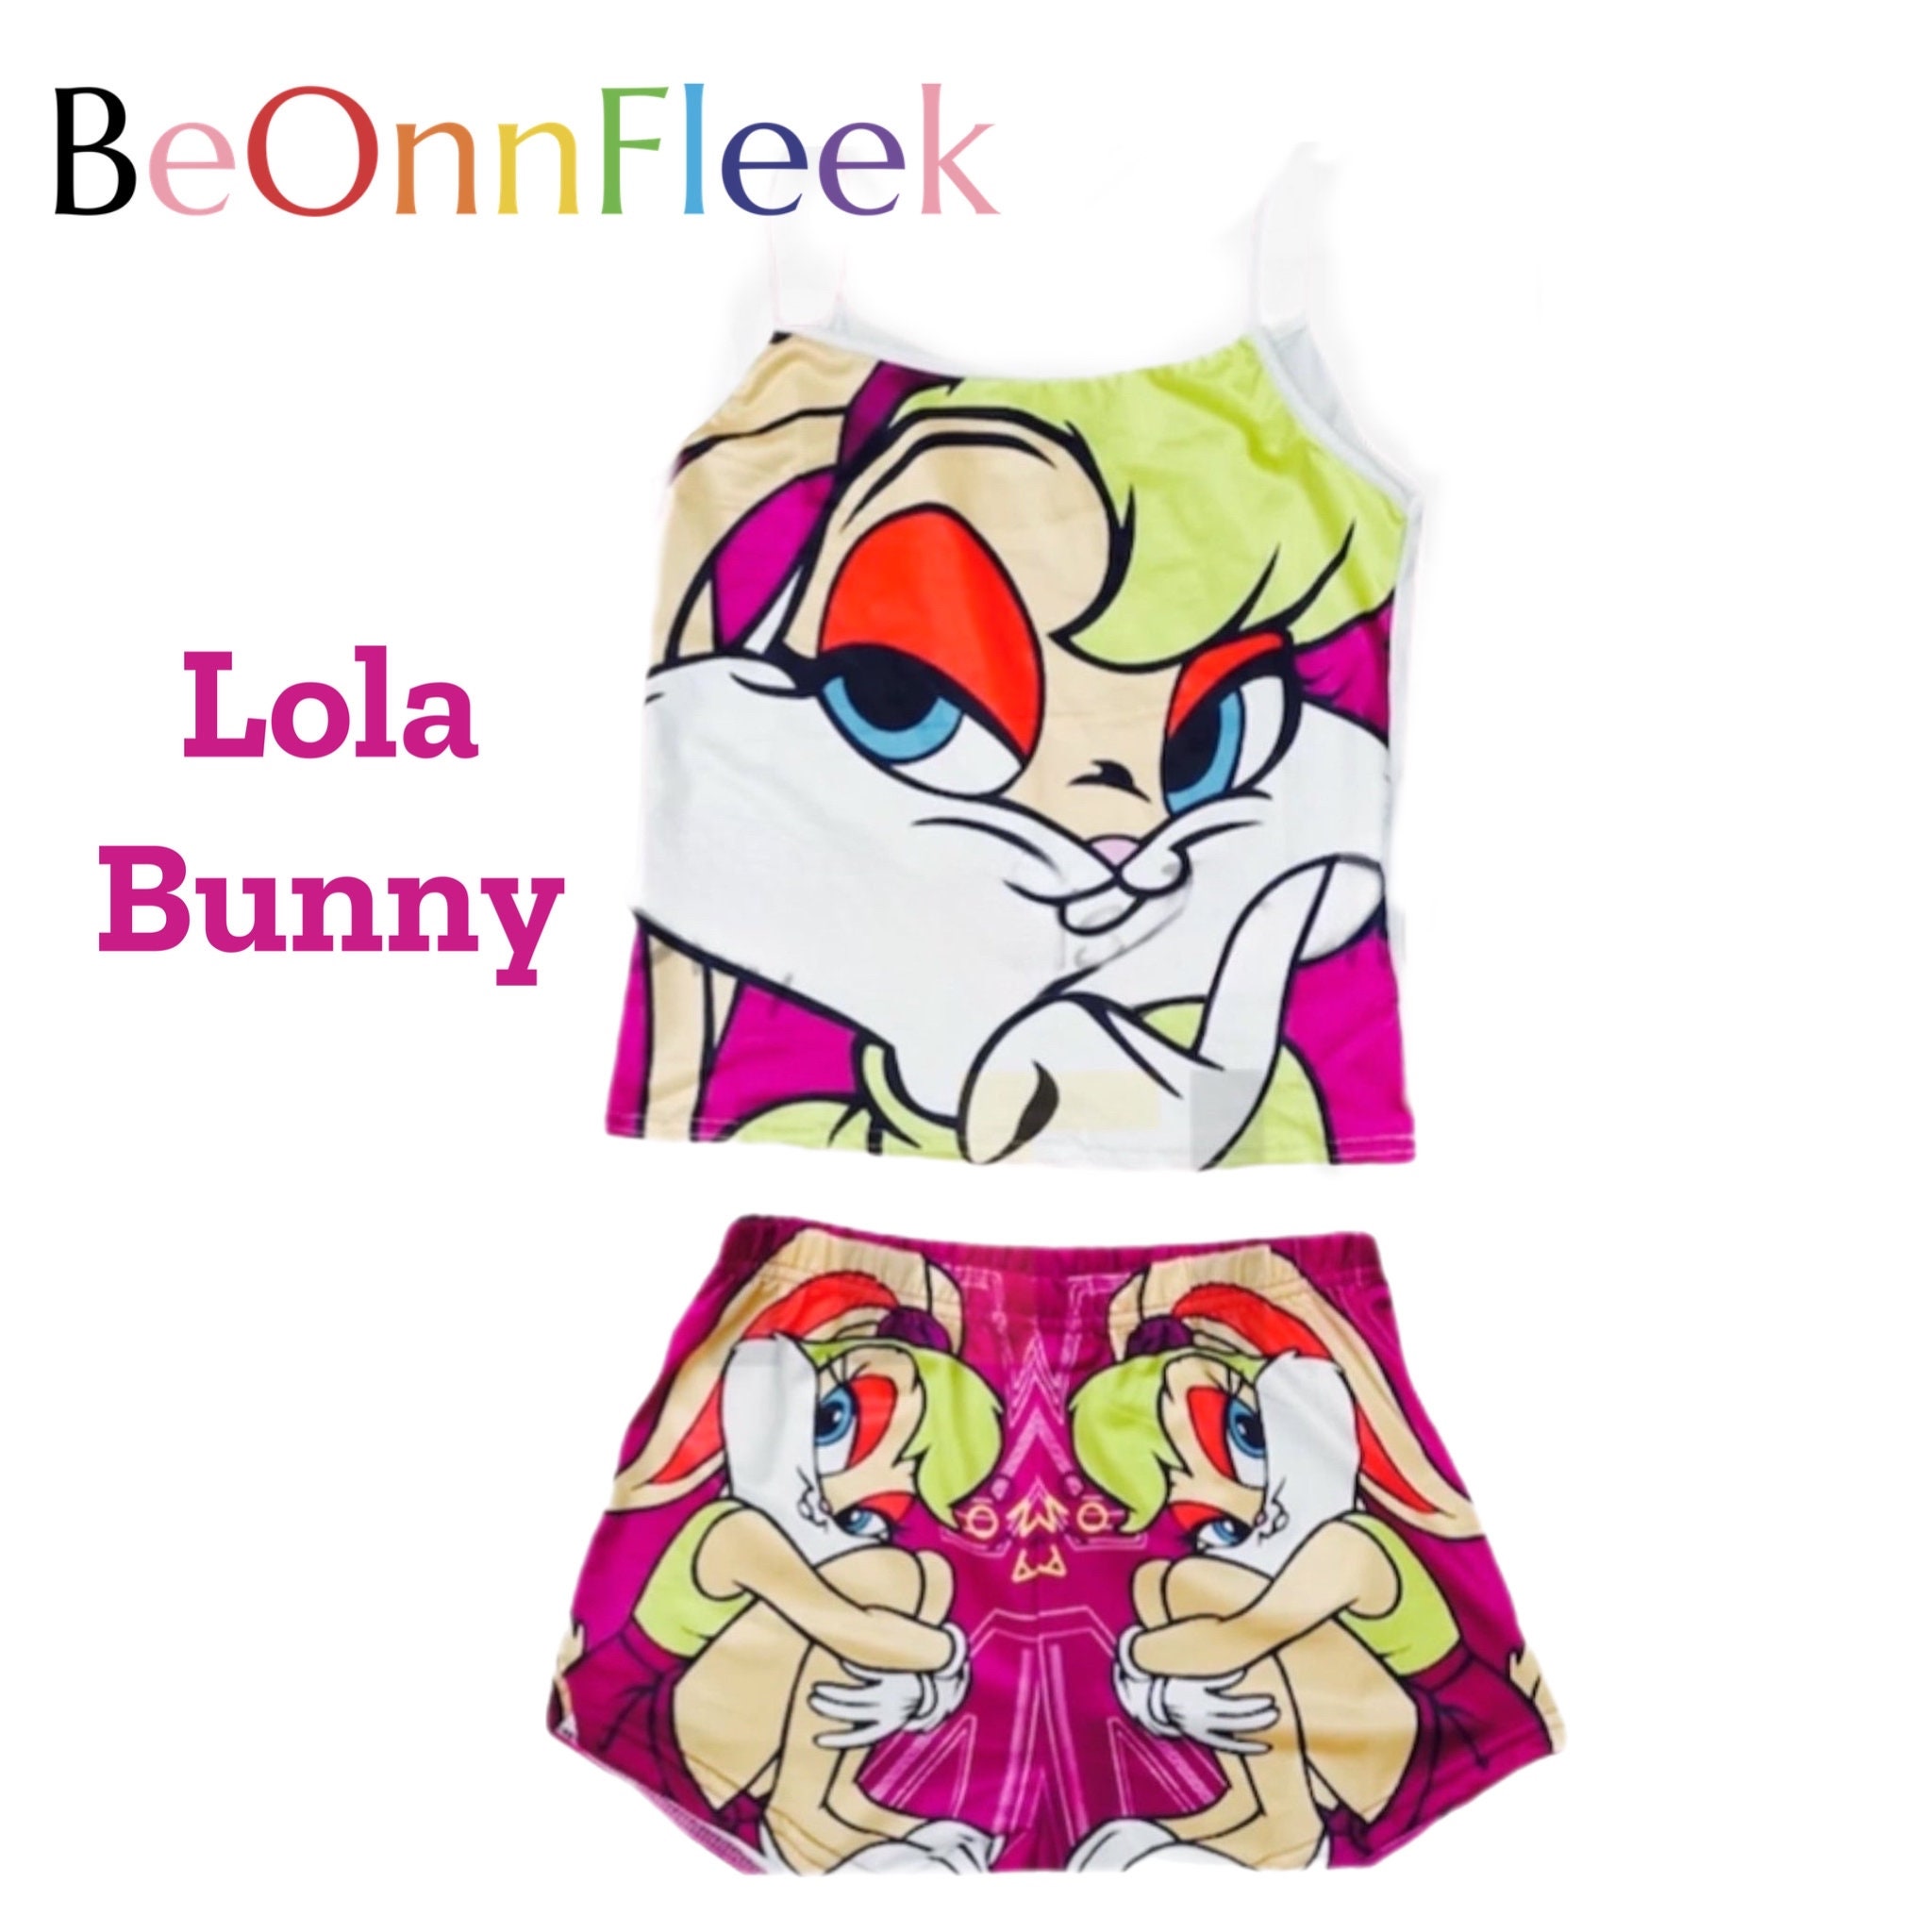 Sexy Lola bunny costume. (Other sizes/sets avail, on my listings)